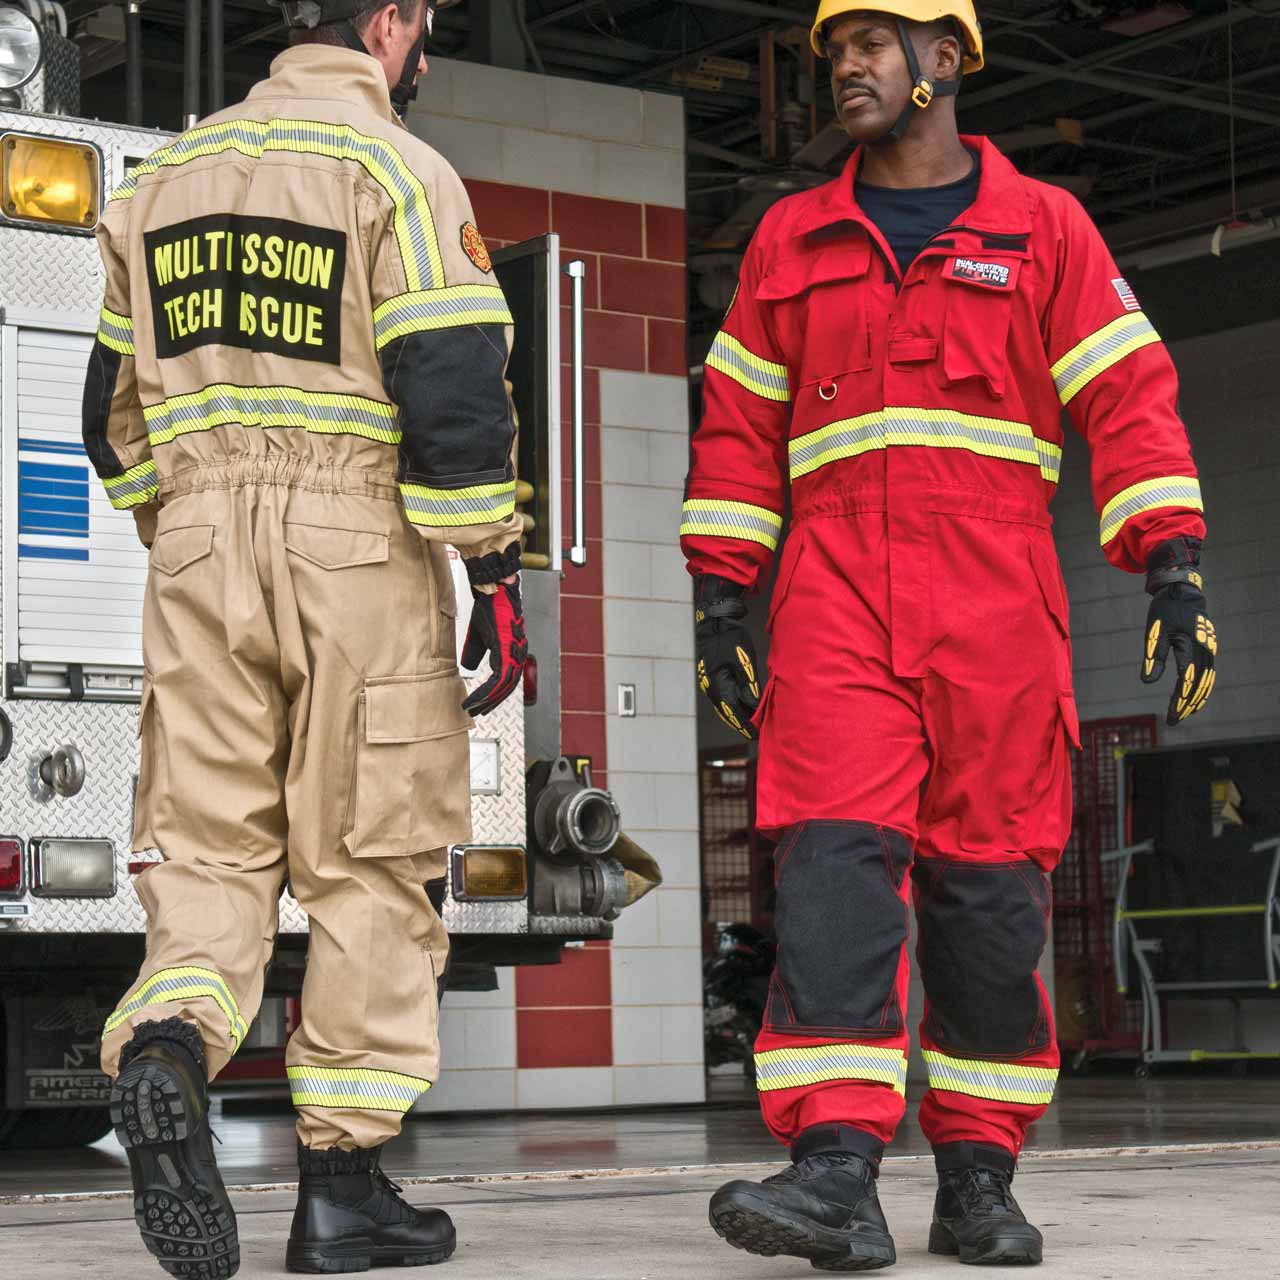 Tactical Gear, Tactical Firefighter Gear, Fireman Gear, Tactical Pants -  Emergency Responder Products